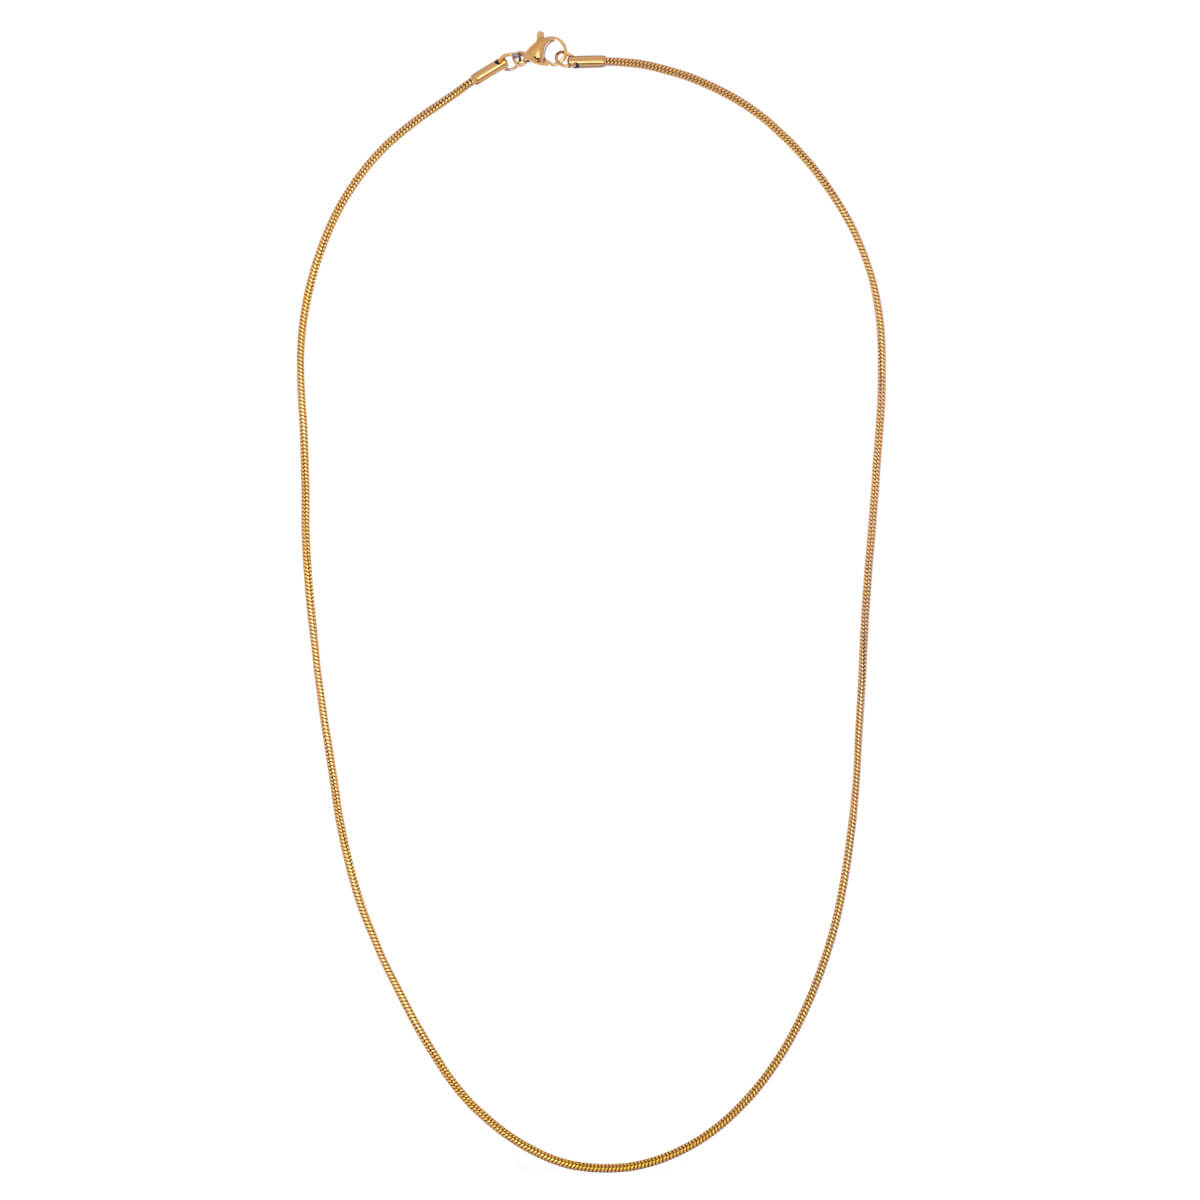 Thin gold plated snake necklace 50cm (steel 316L)